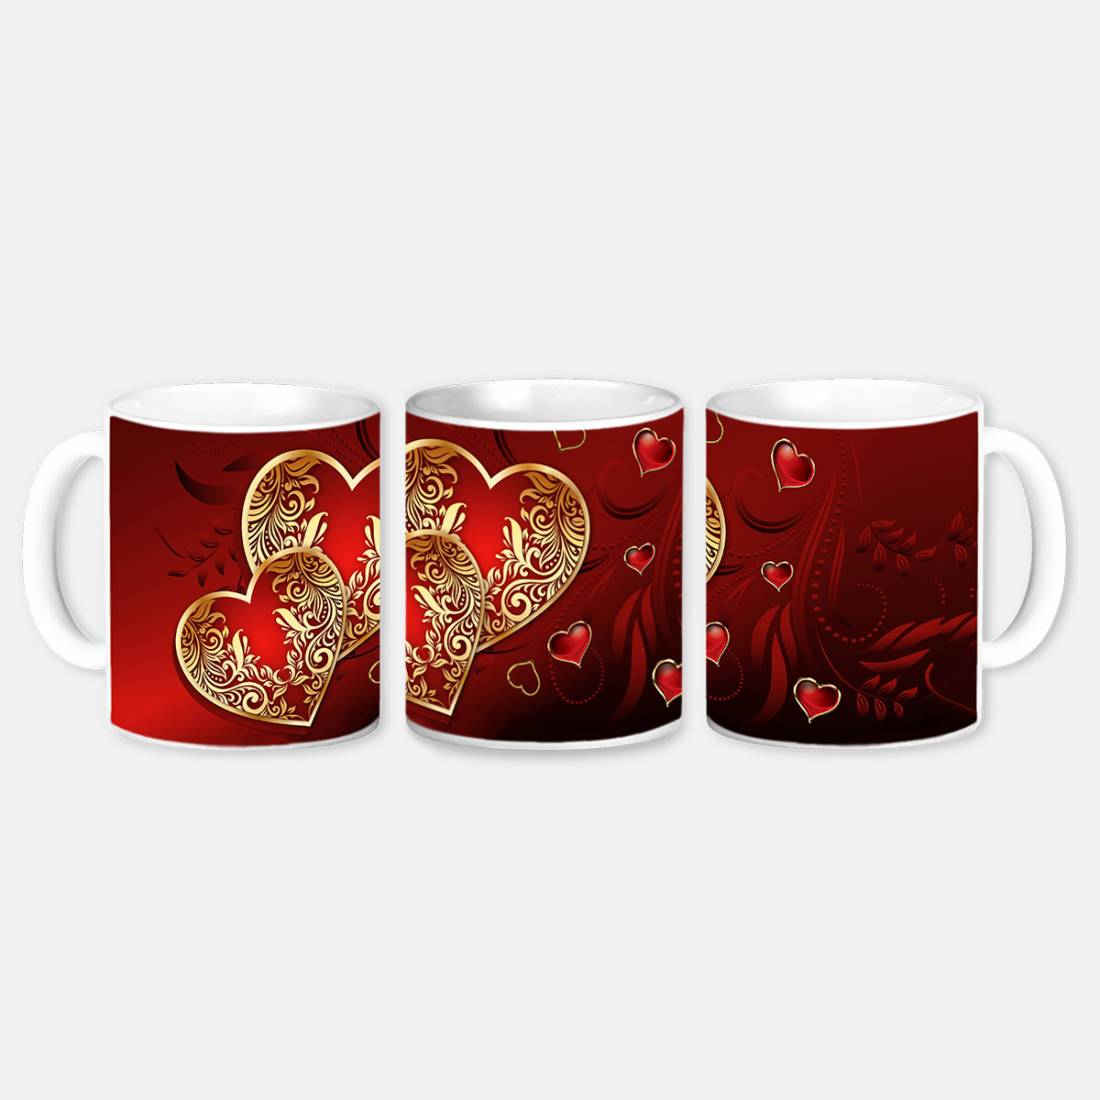 Buy ME & YOU Propose Day Gifts for Couple|Valentine's Day Gift for  Wife/Girlfriend|Romantic Gift for Husband/Boyfriend|Unique Love Gift with  Printed Cushion (12 * 12 Inch) Online at Low Prices in India -